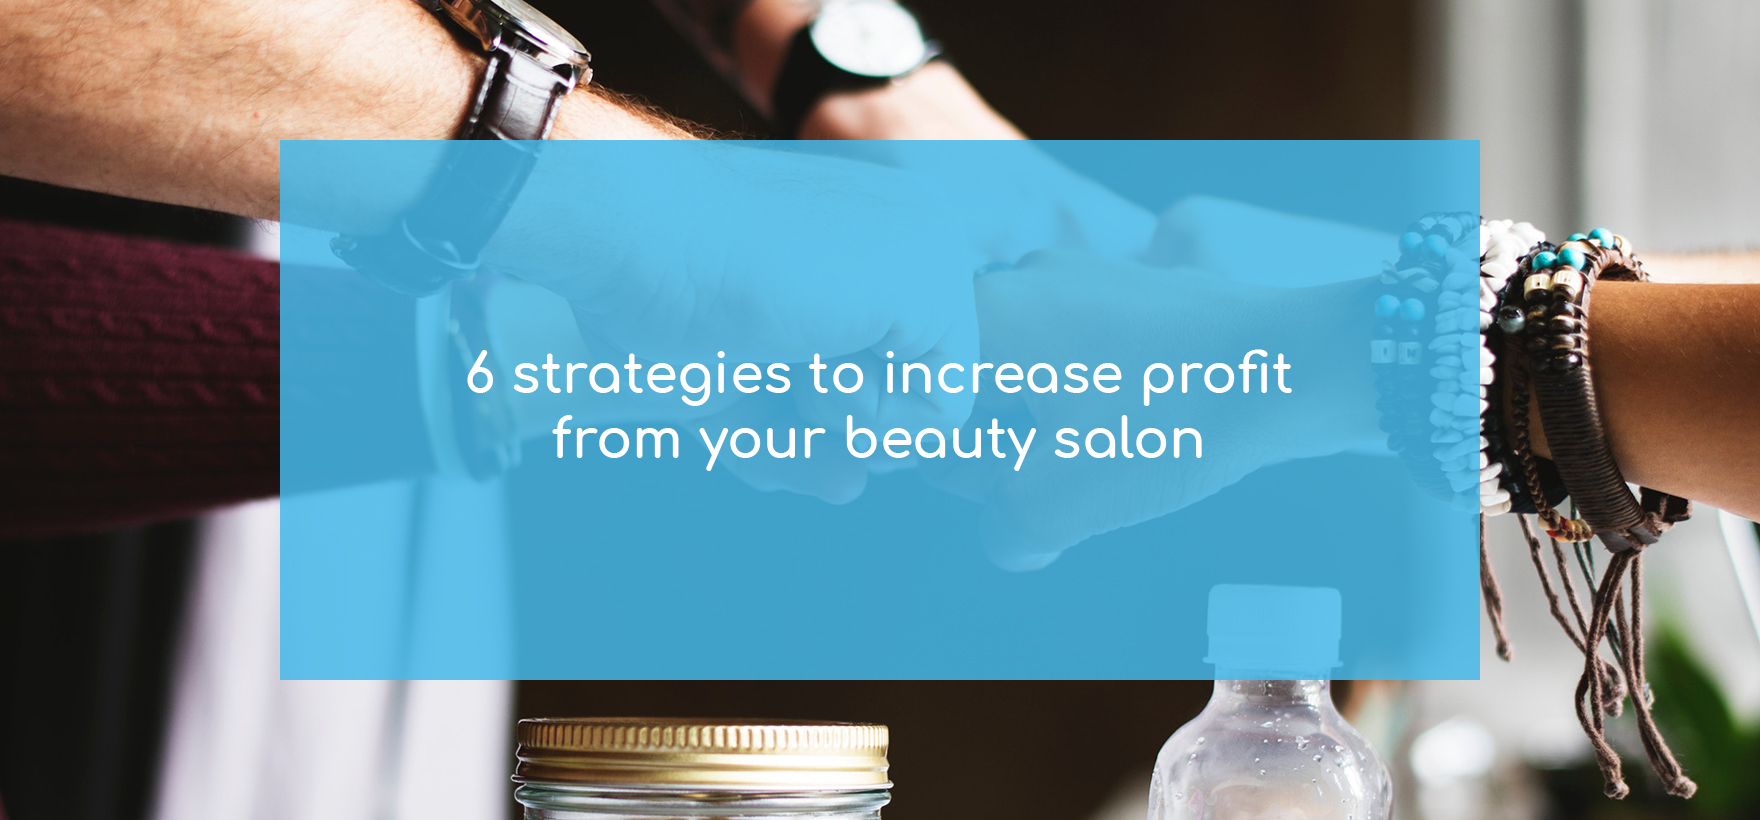 6 strategies to increase profit from your beauty salon